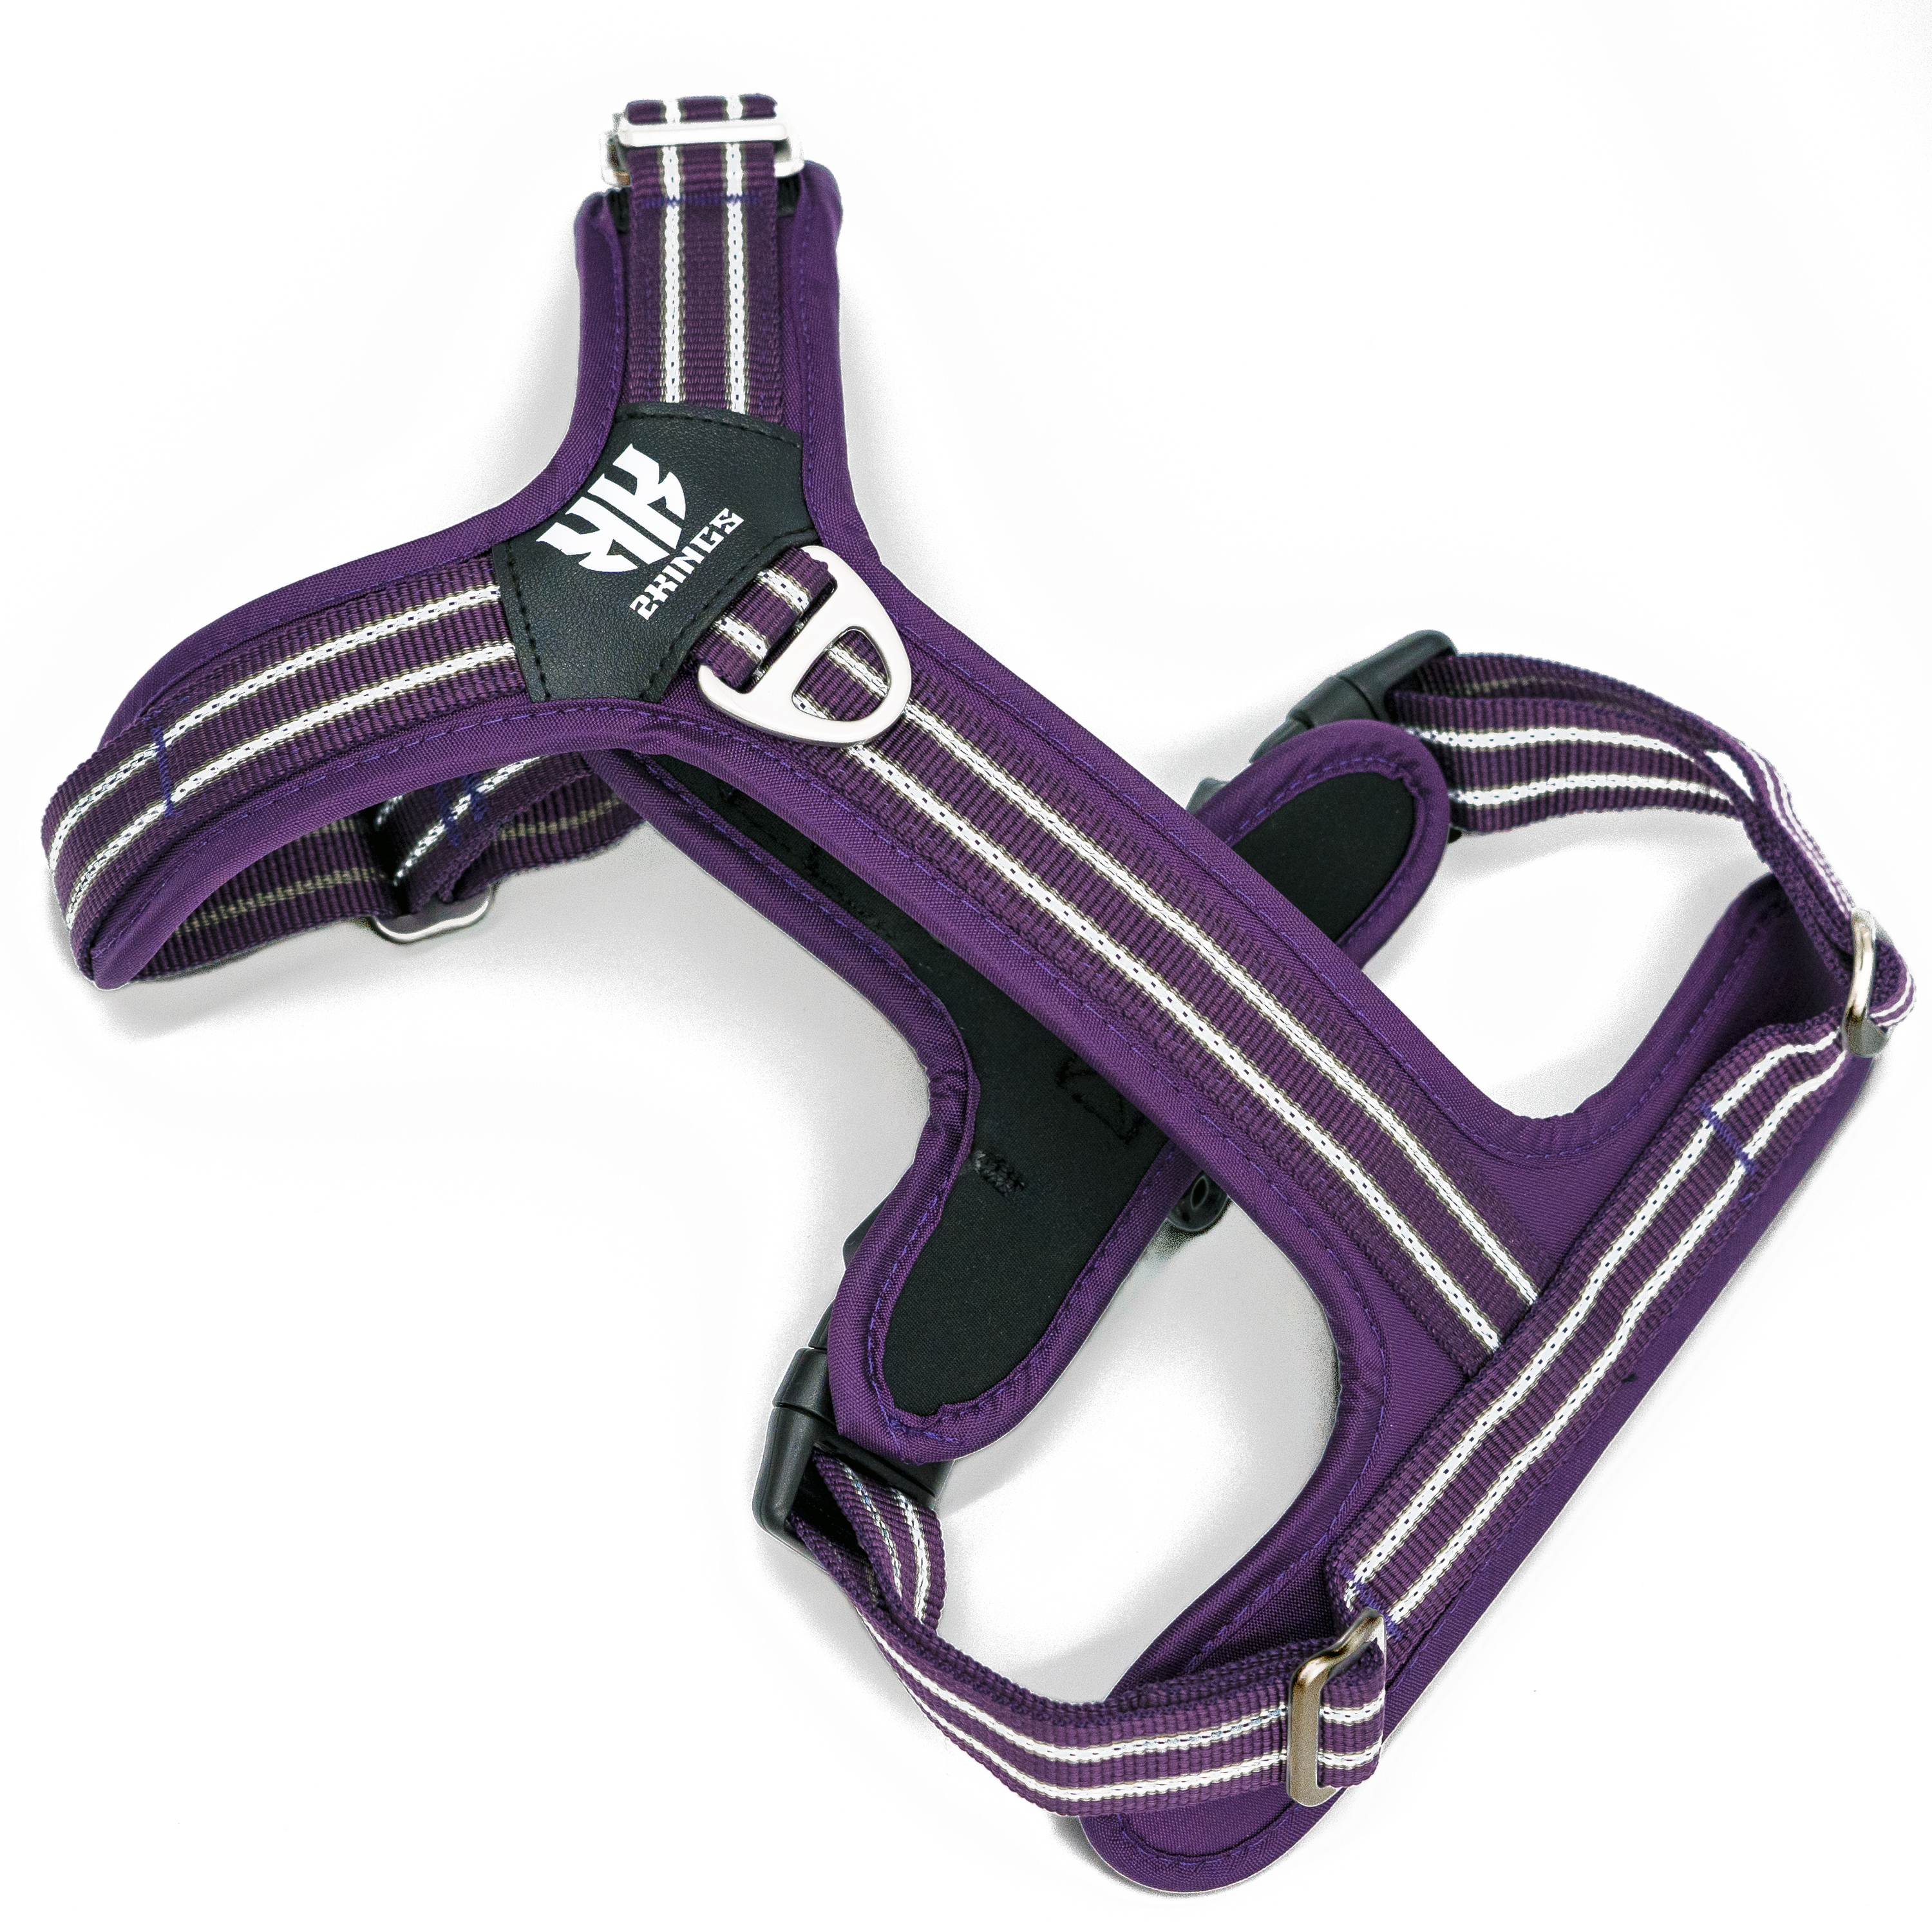 Adjustable Dog Harness with Double-Handed Lead Set - Lightweight & Reflective - Purple.